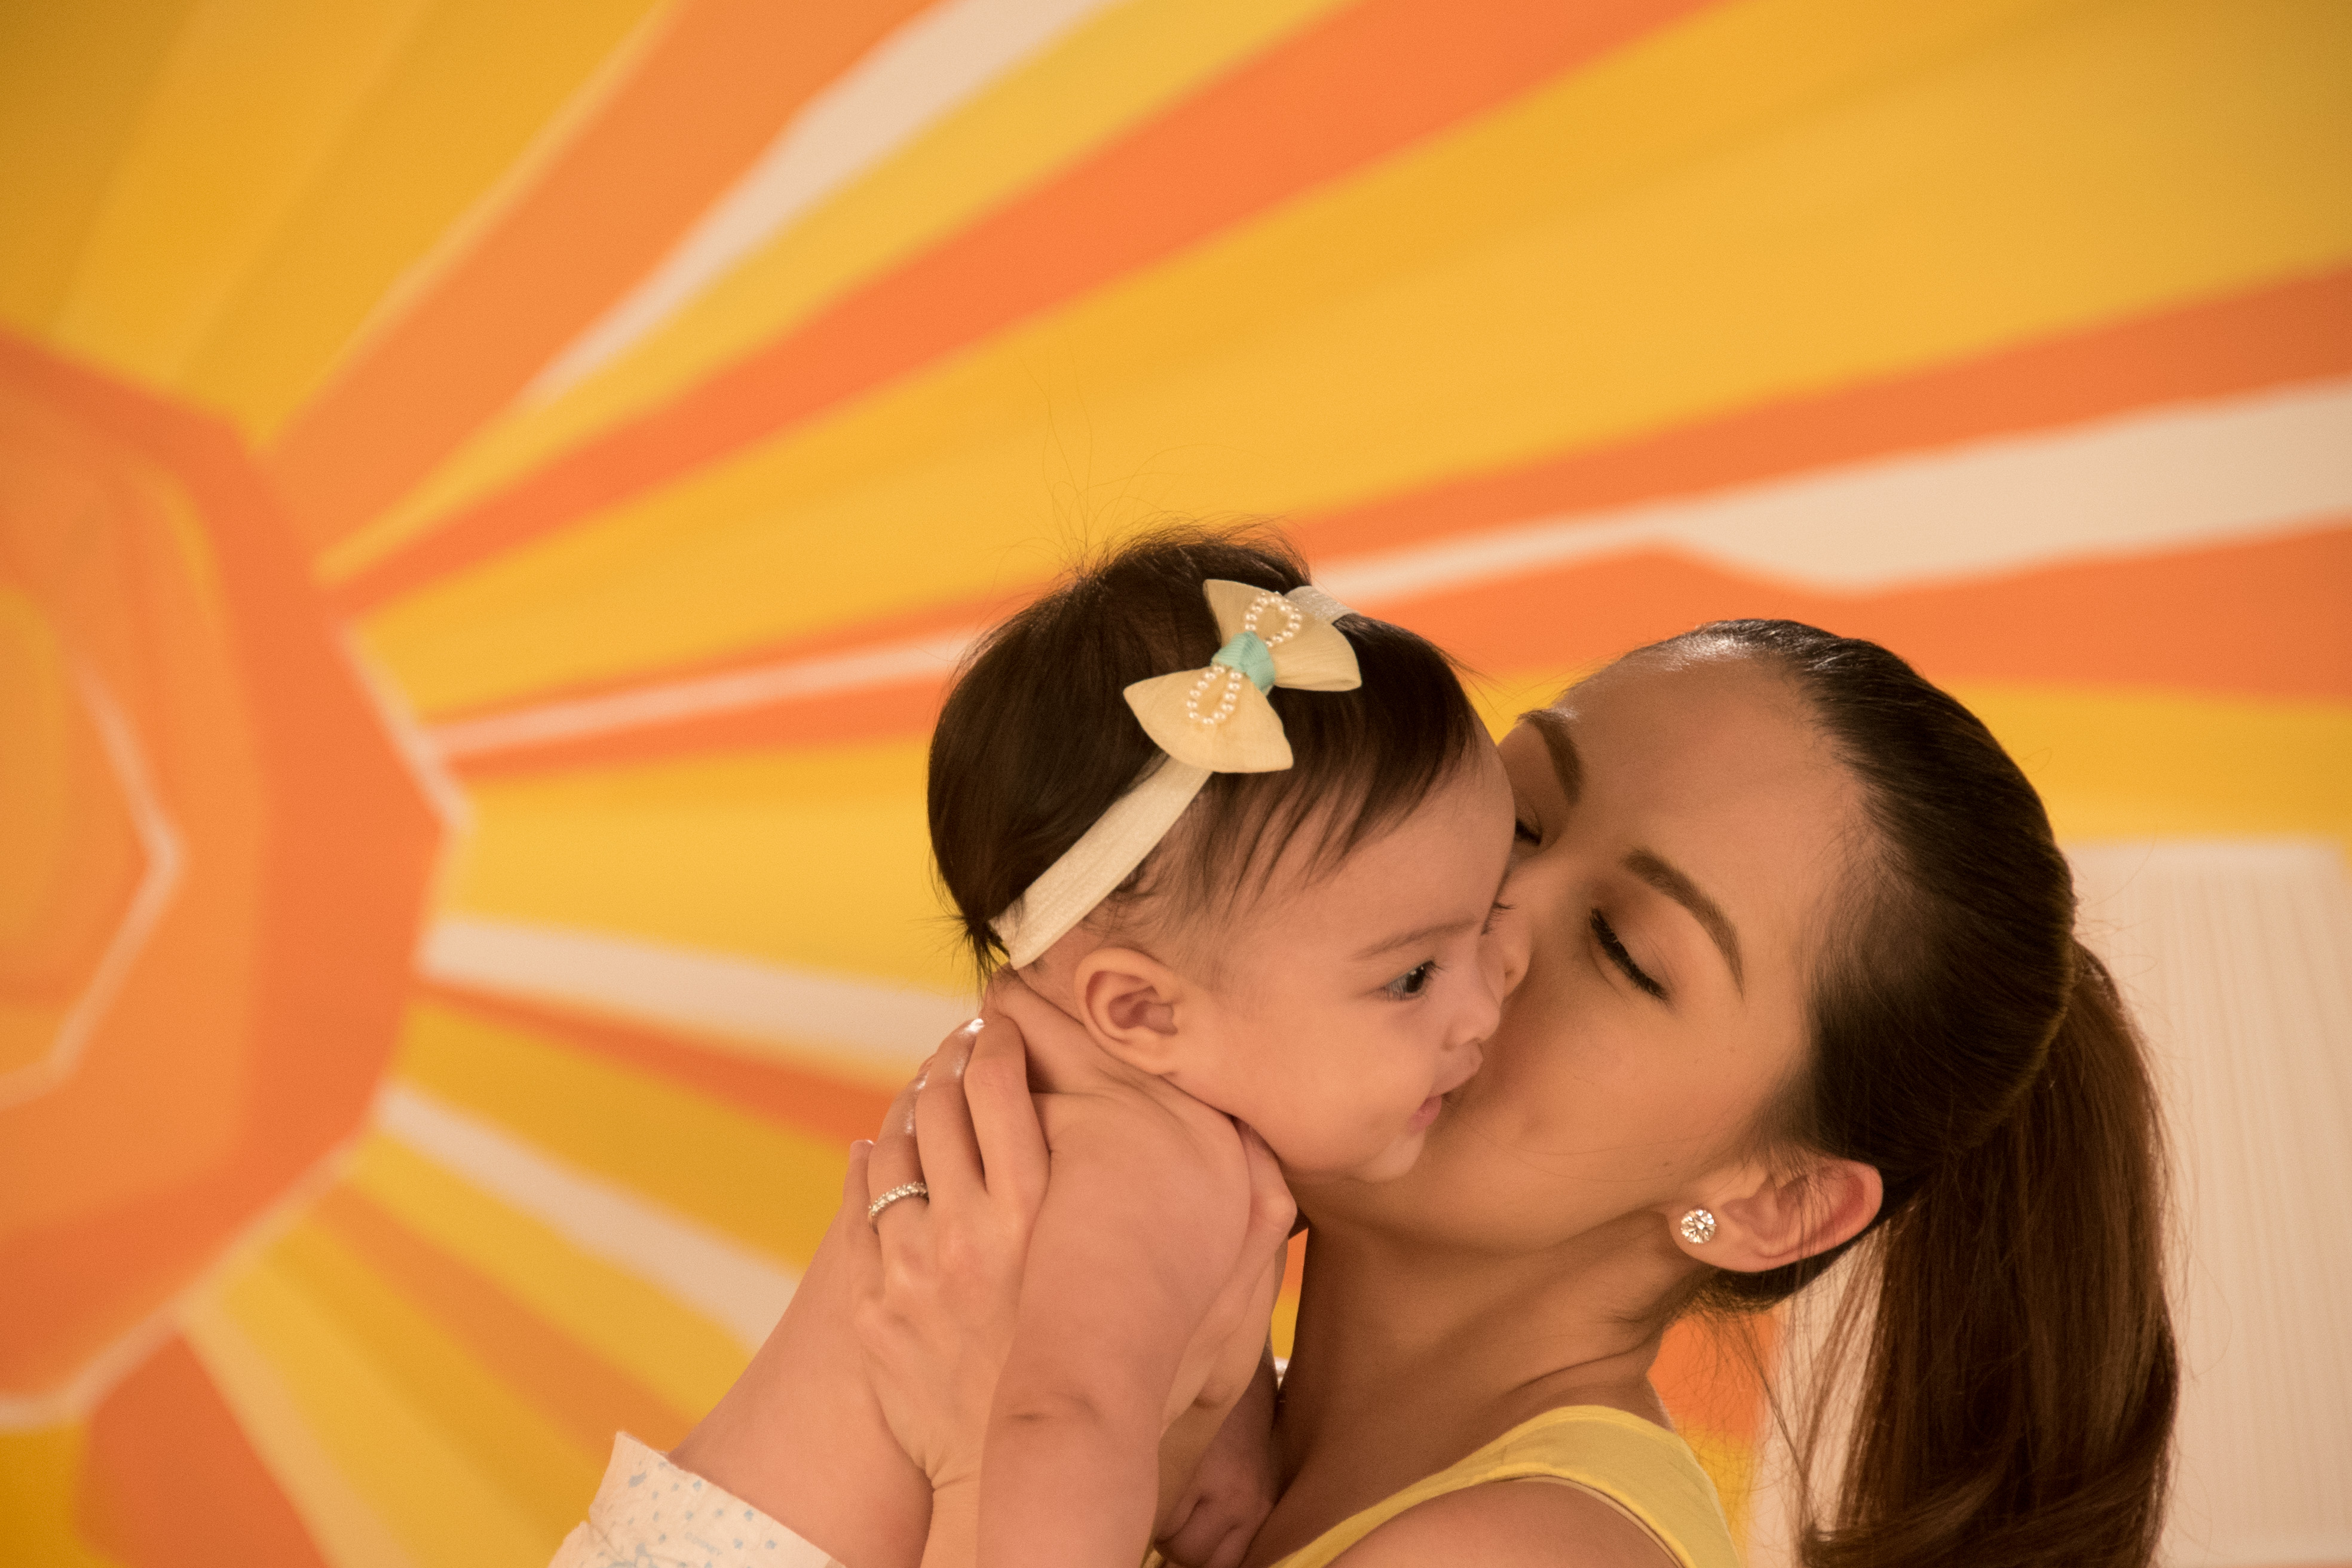 Marian Rivera is now a SuperMom with Johnson's Milk + Oats | PSST ...